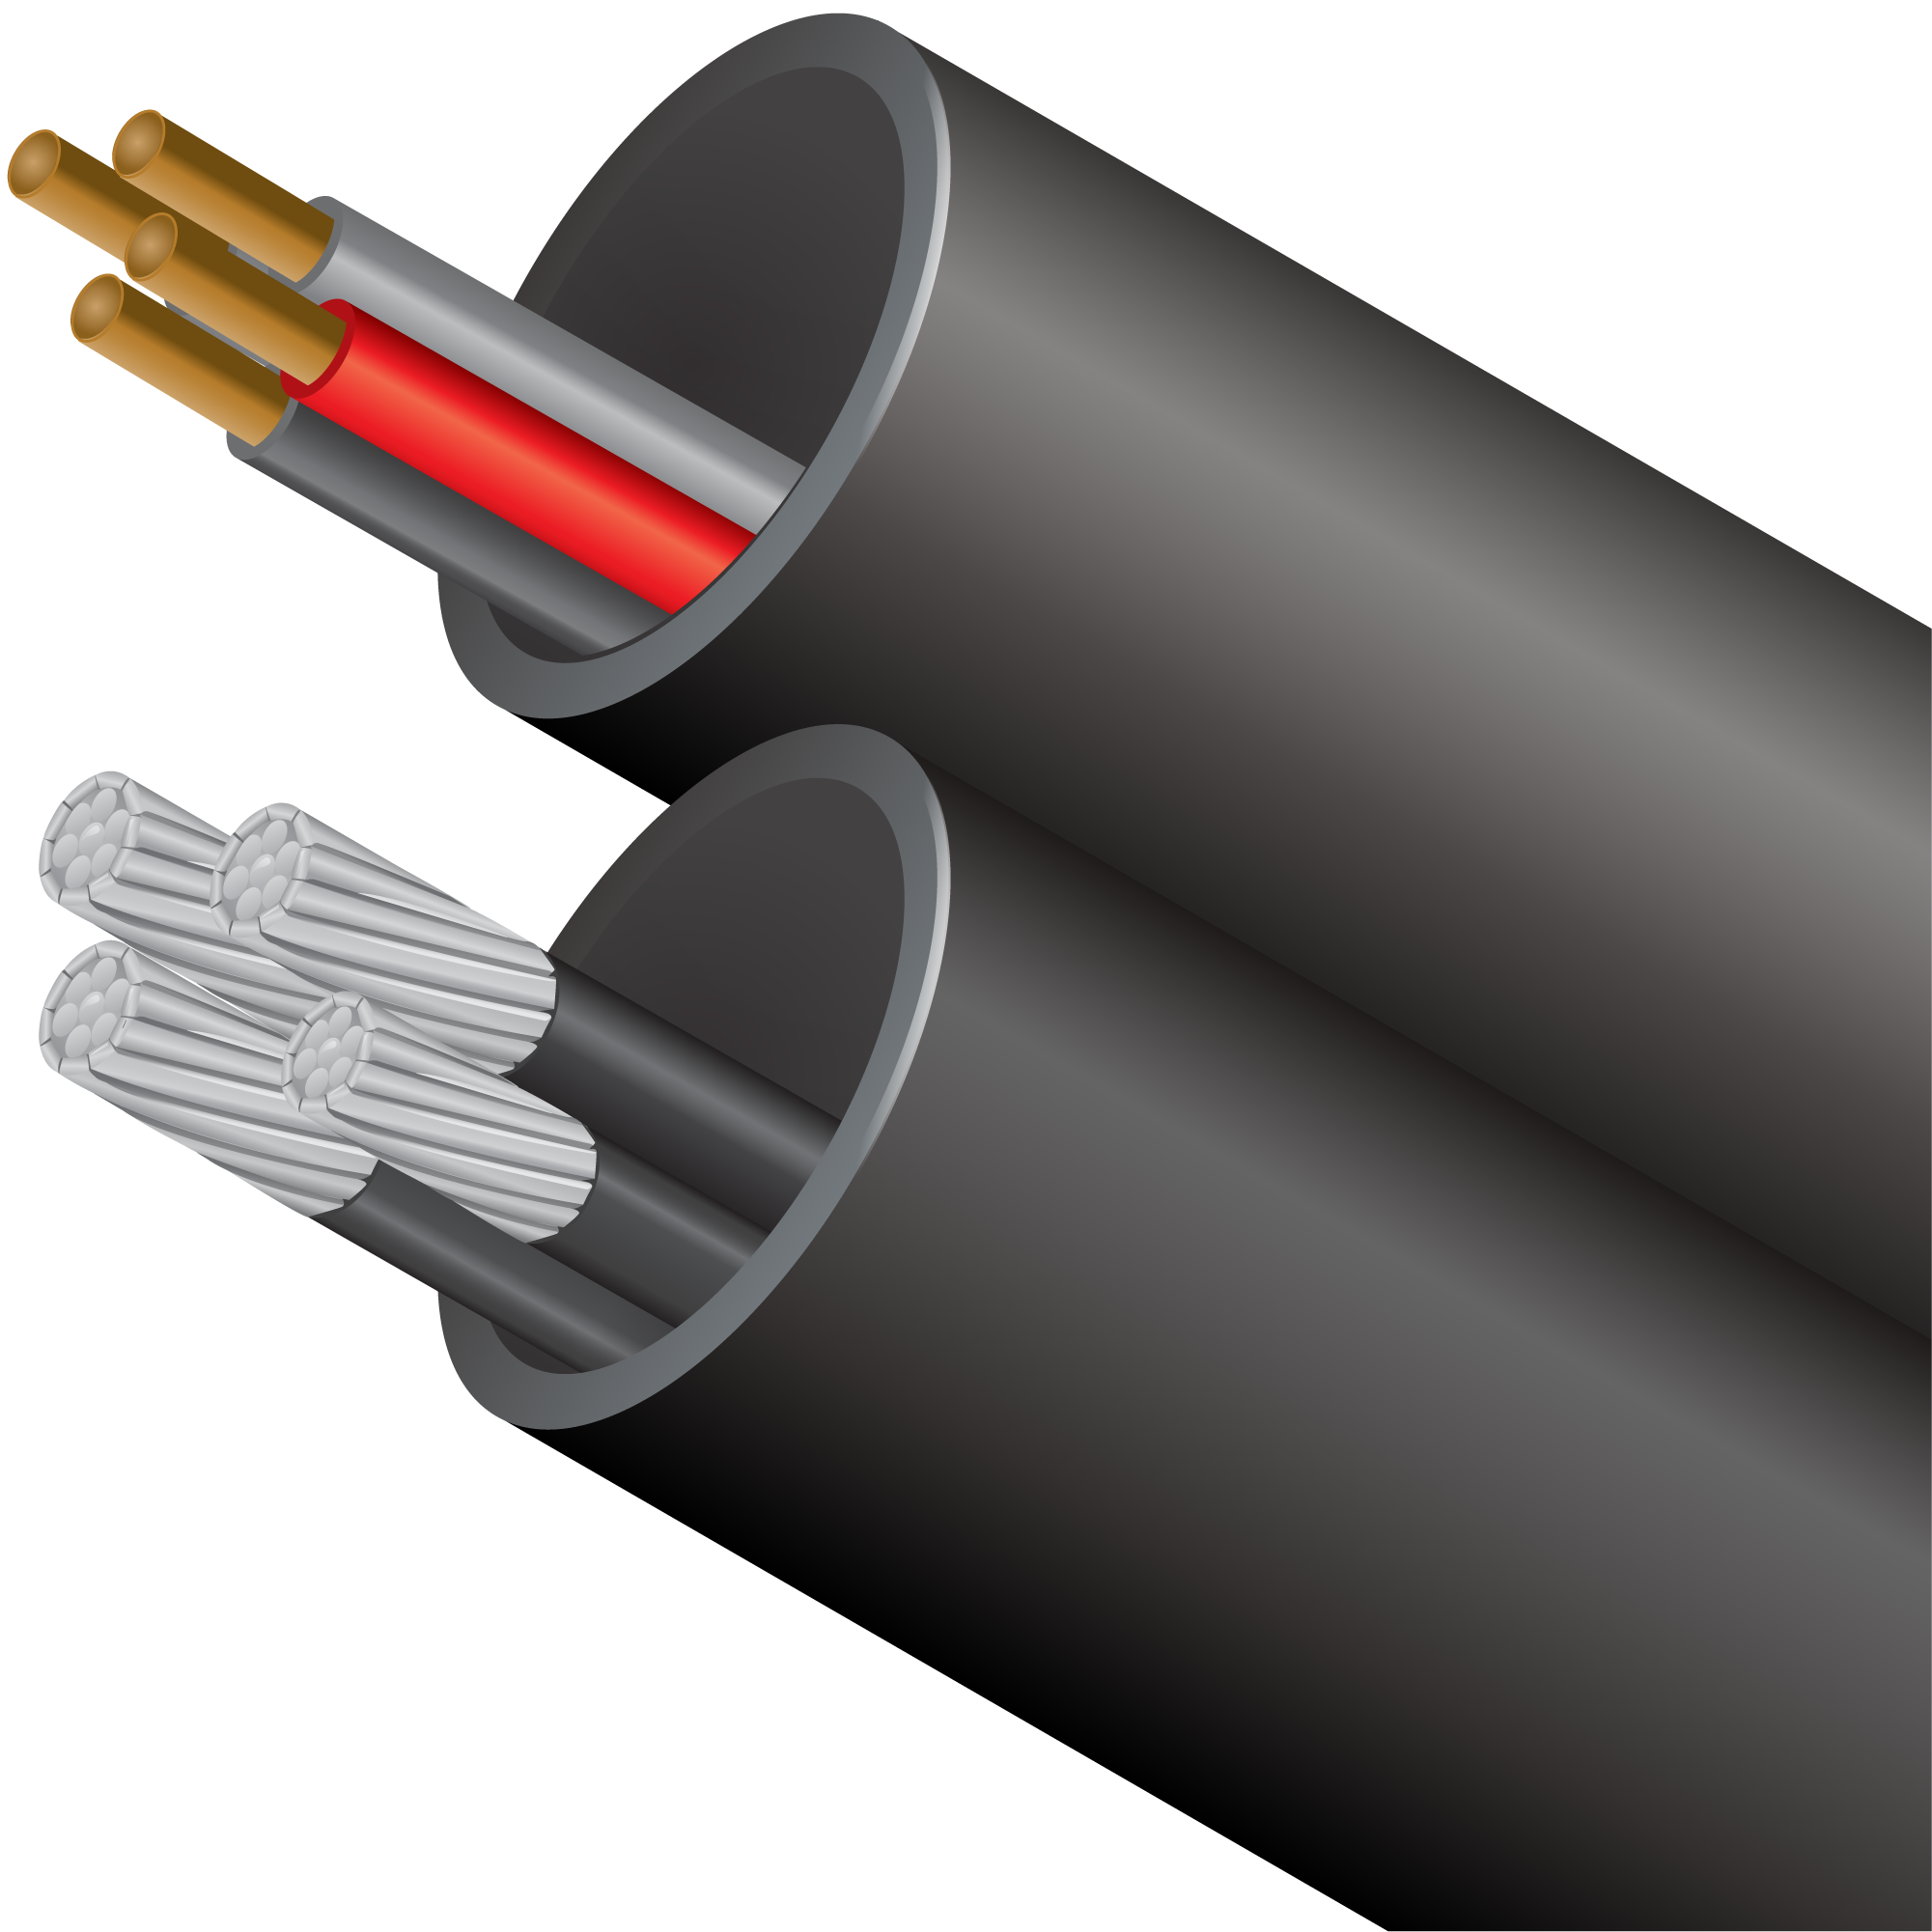 With Cable-in-Conduit (CIC), your choice of cable is factory pre-installed allowing for one-step placement of conduit and cable. 